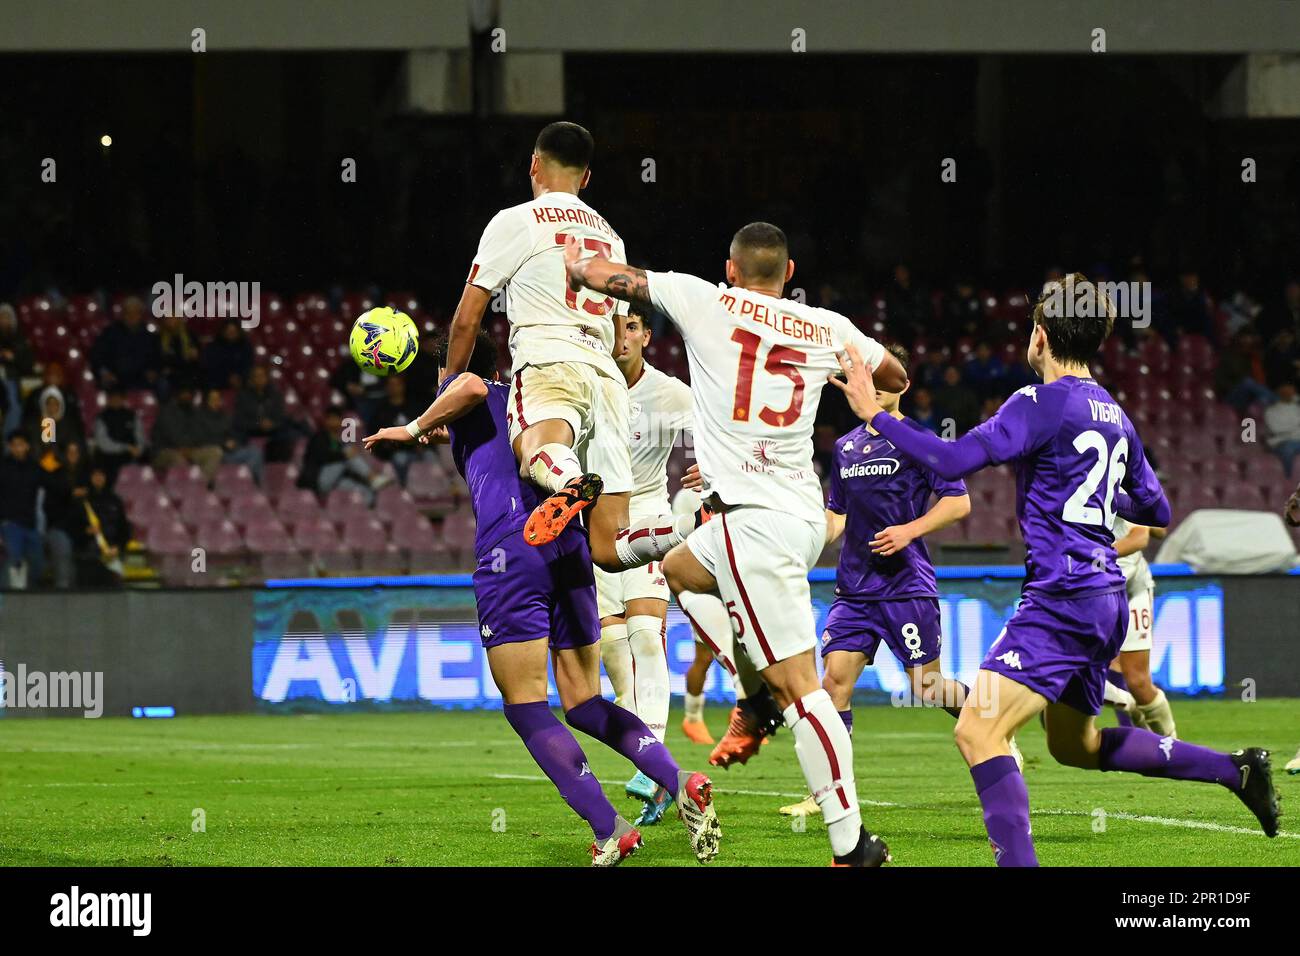 Salerno, Italy. 24th Apr, 2023. Dimitrios Keramitsis of AS Roma scores the winning goal of the Coppa Italia Primavera Final match between AS Roma and ACF Fiorentina at Arechi Stadium on April 25, 2023 in Salerno, Italy. - Credit: Nicola Ianuale/Alamy Live News Stock Photo